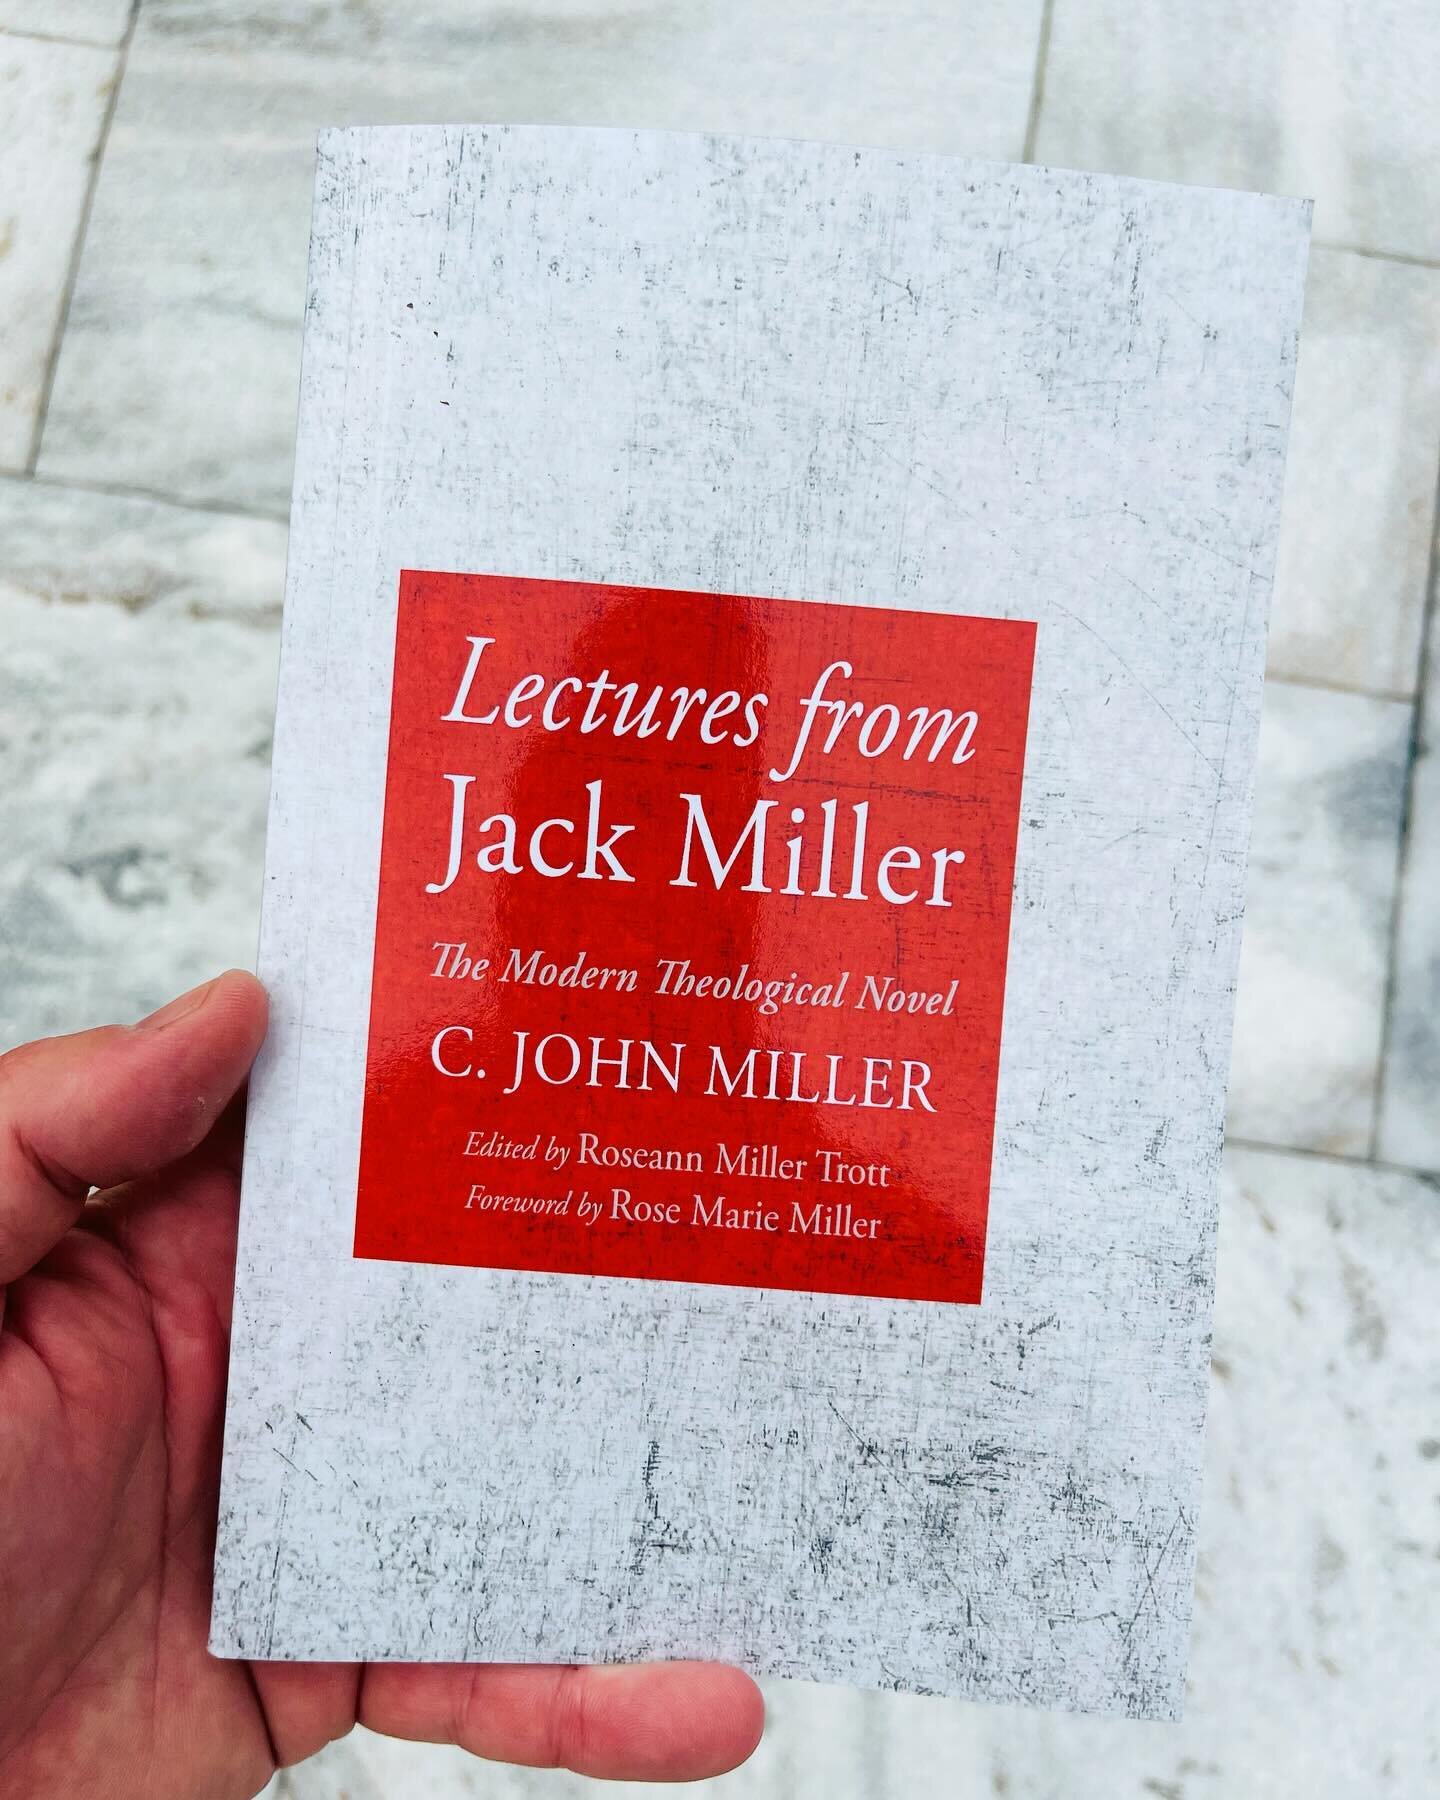 New read.
.
.
Have you read any of Jack Miller&rsquo;s work? He was famous for his Gospel heart and saying &ldquo;Cheer up! You are far worse than you think&rdquo; and &ldquo;Cheer up! God&rsquo;s grace is greater than you&rsquo;ve ever dared hope&rd